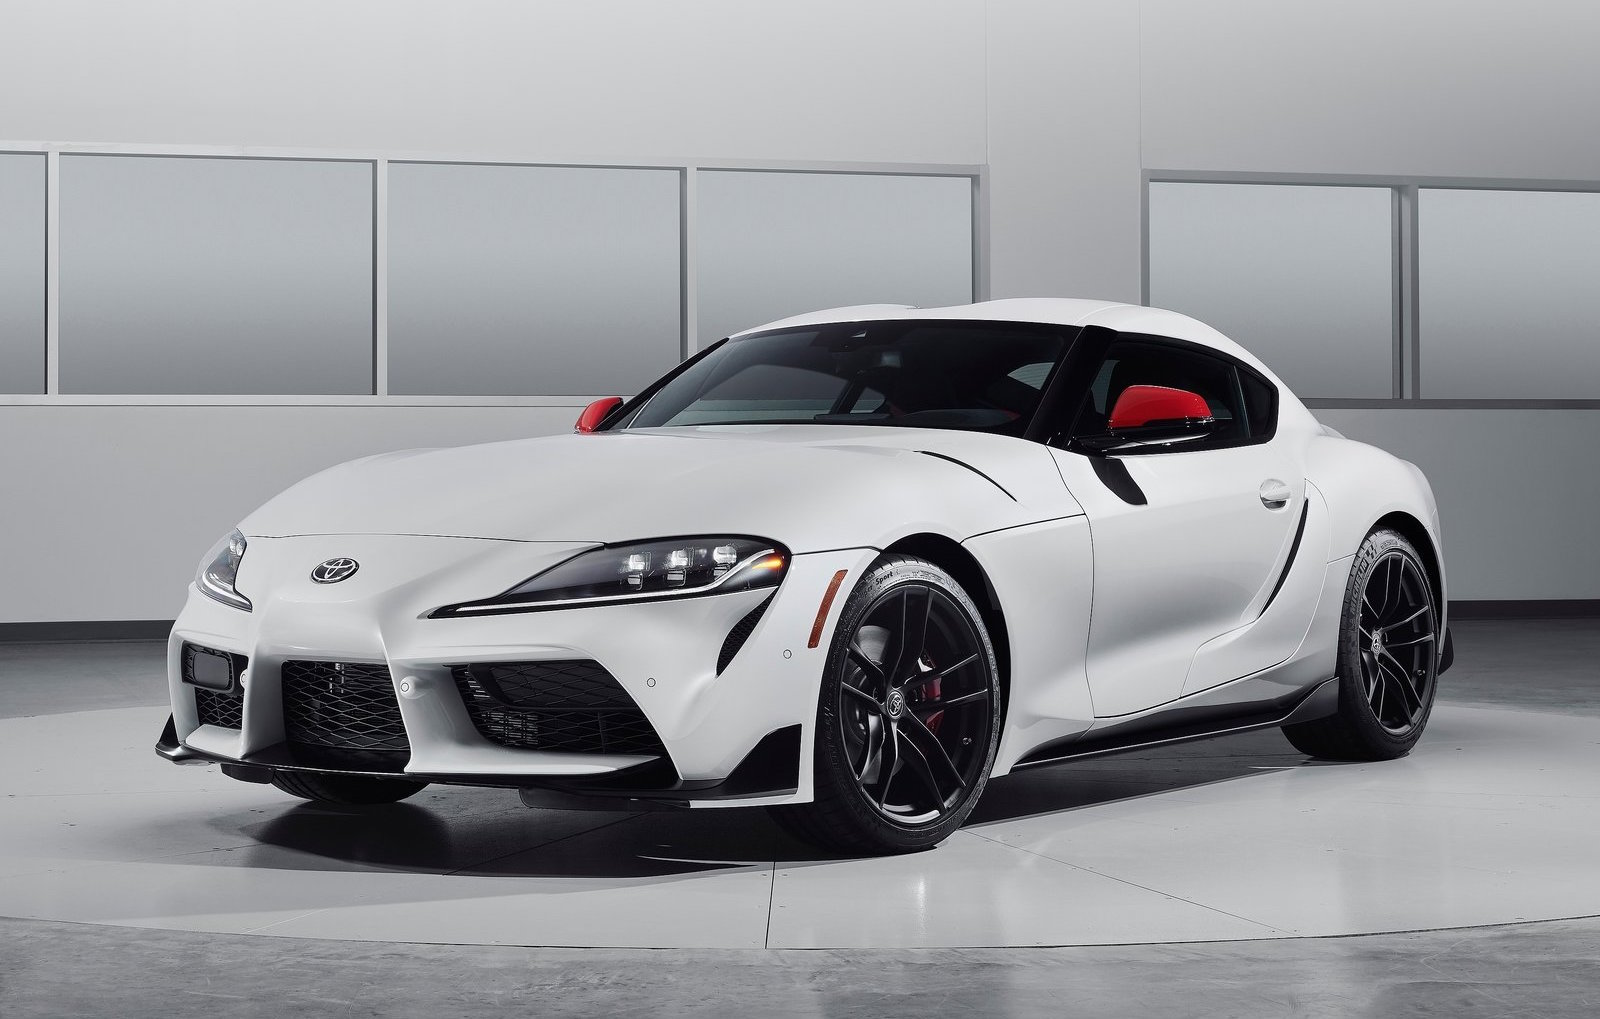 2020 Toyota GR Supra unveiled, arrives in Australia later this year